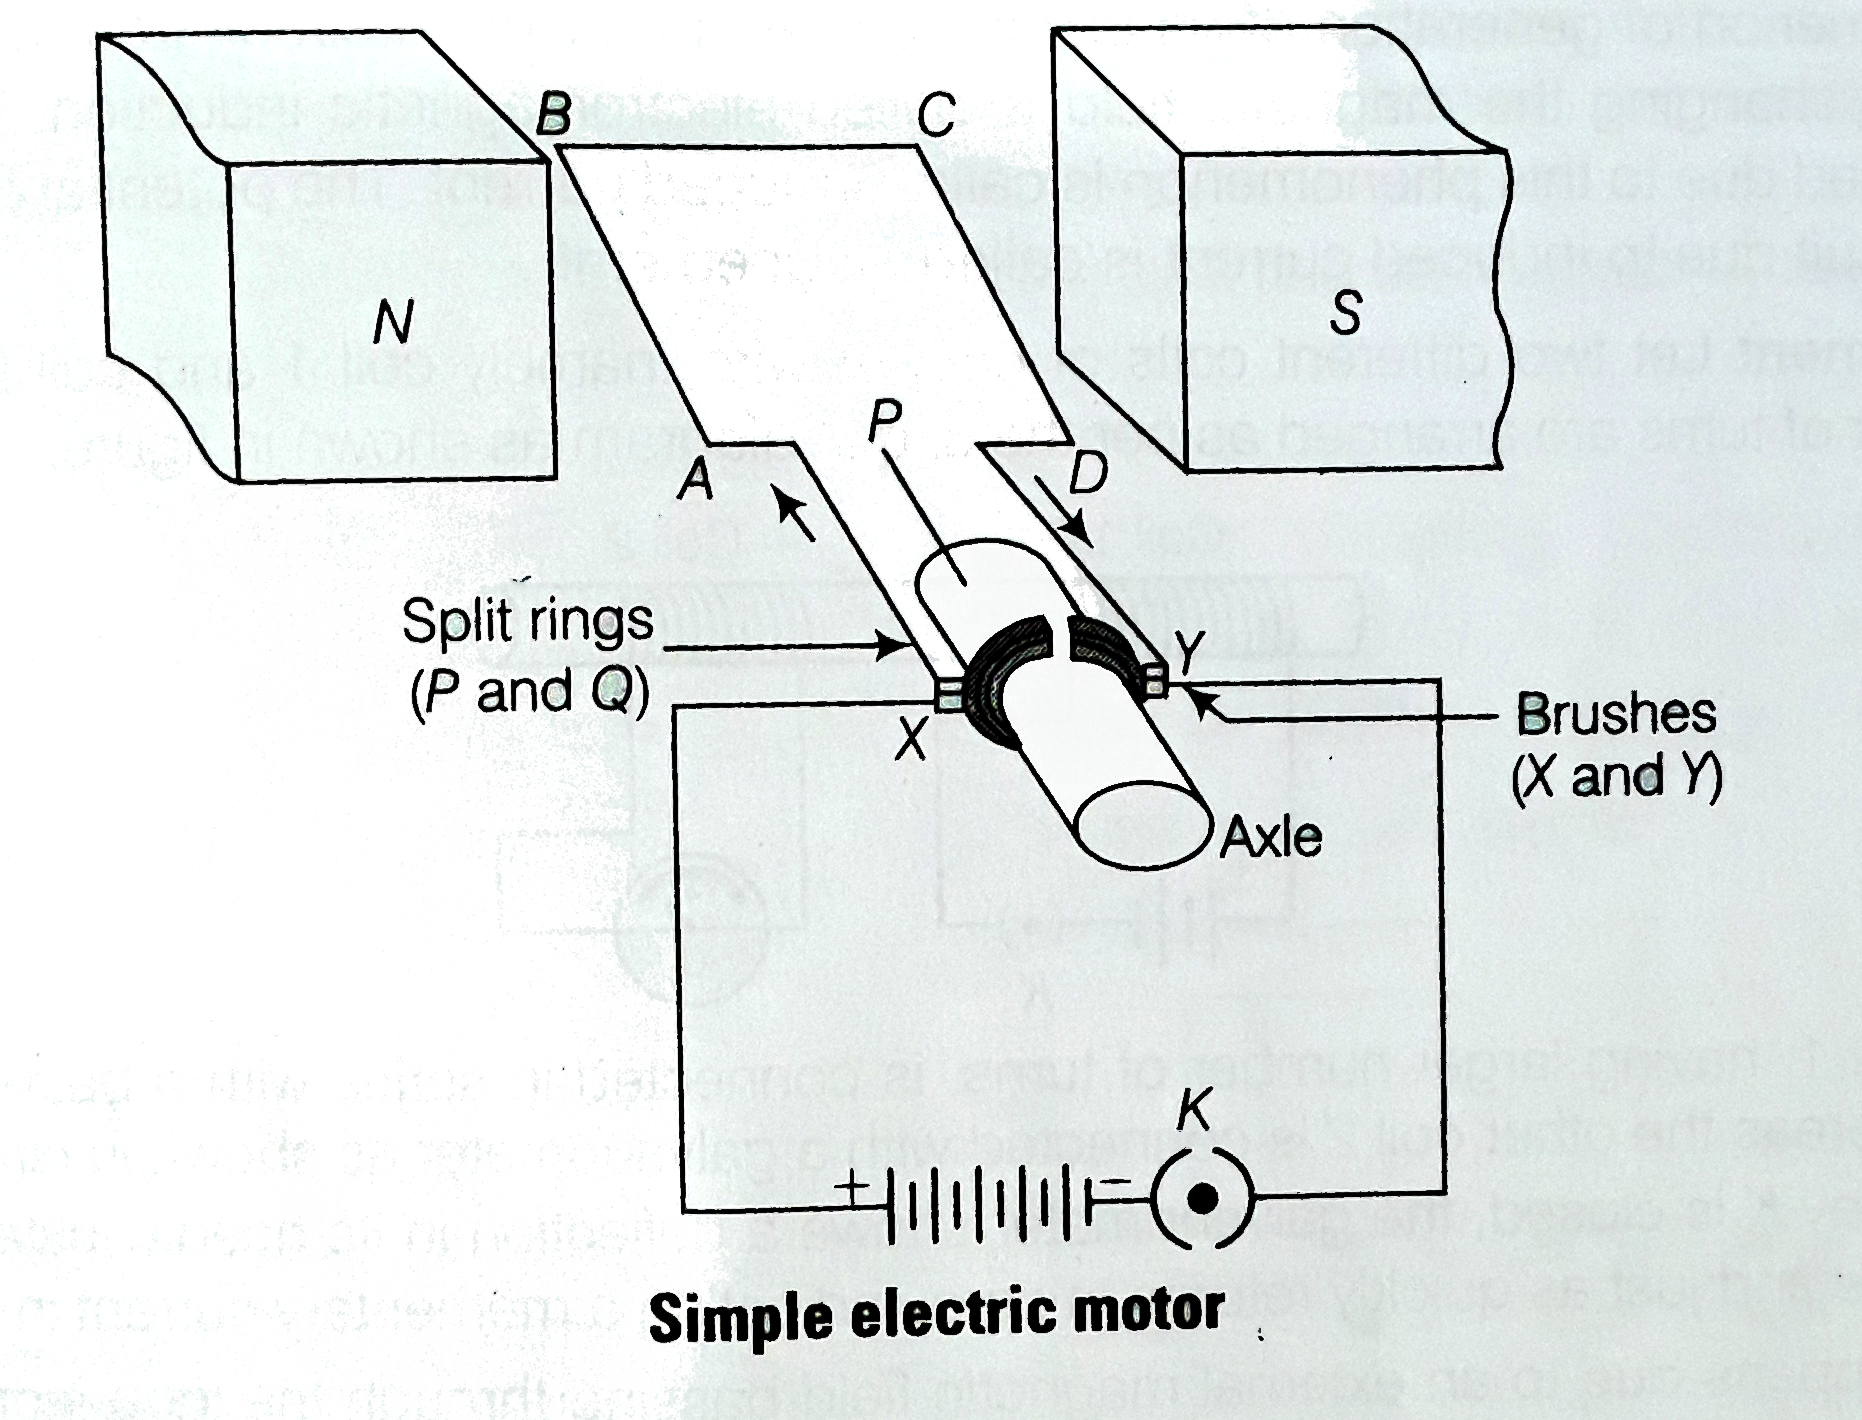 Electric Motor Diagram by TheDevinGreat on DeviantArt